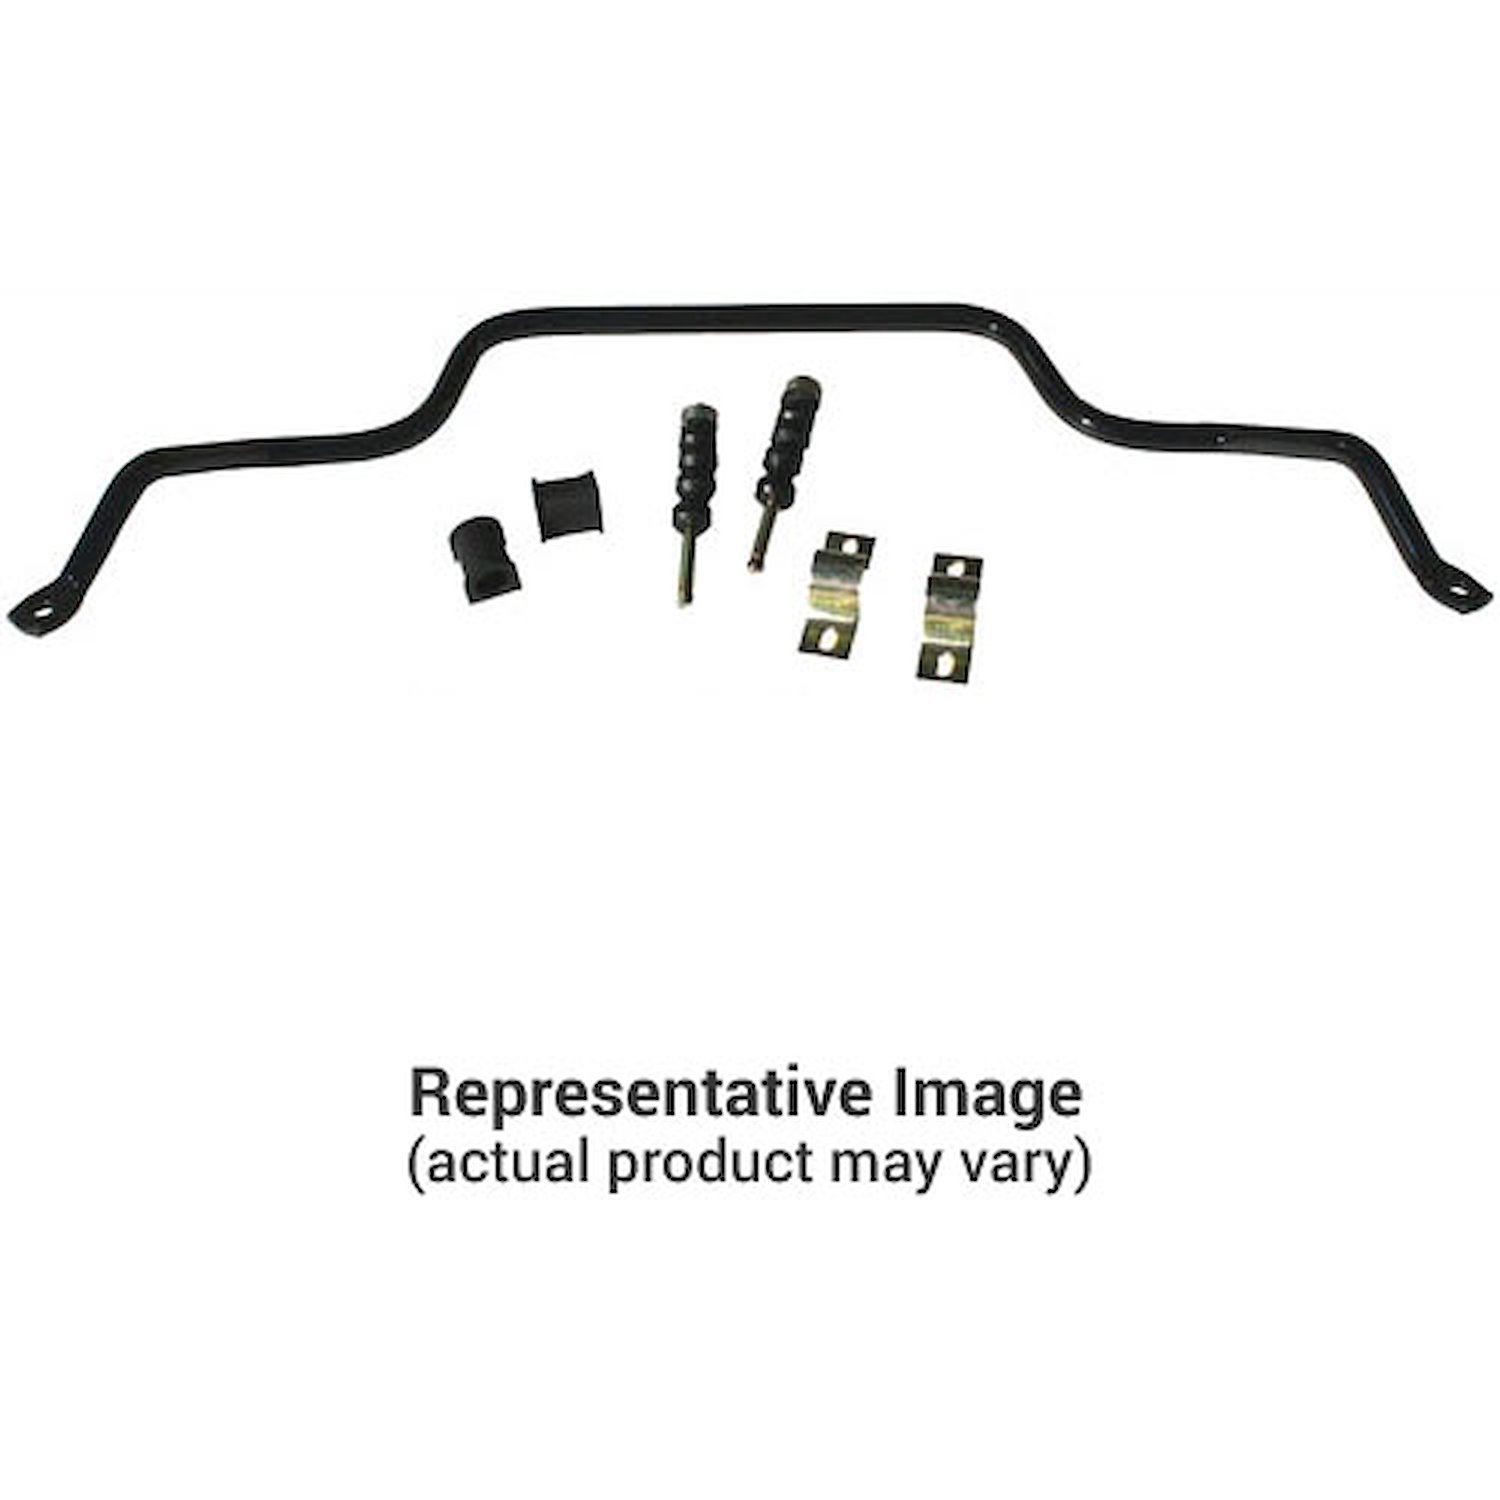 1" Front Sway Bar 1997-03 Z3